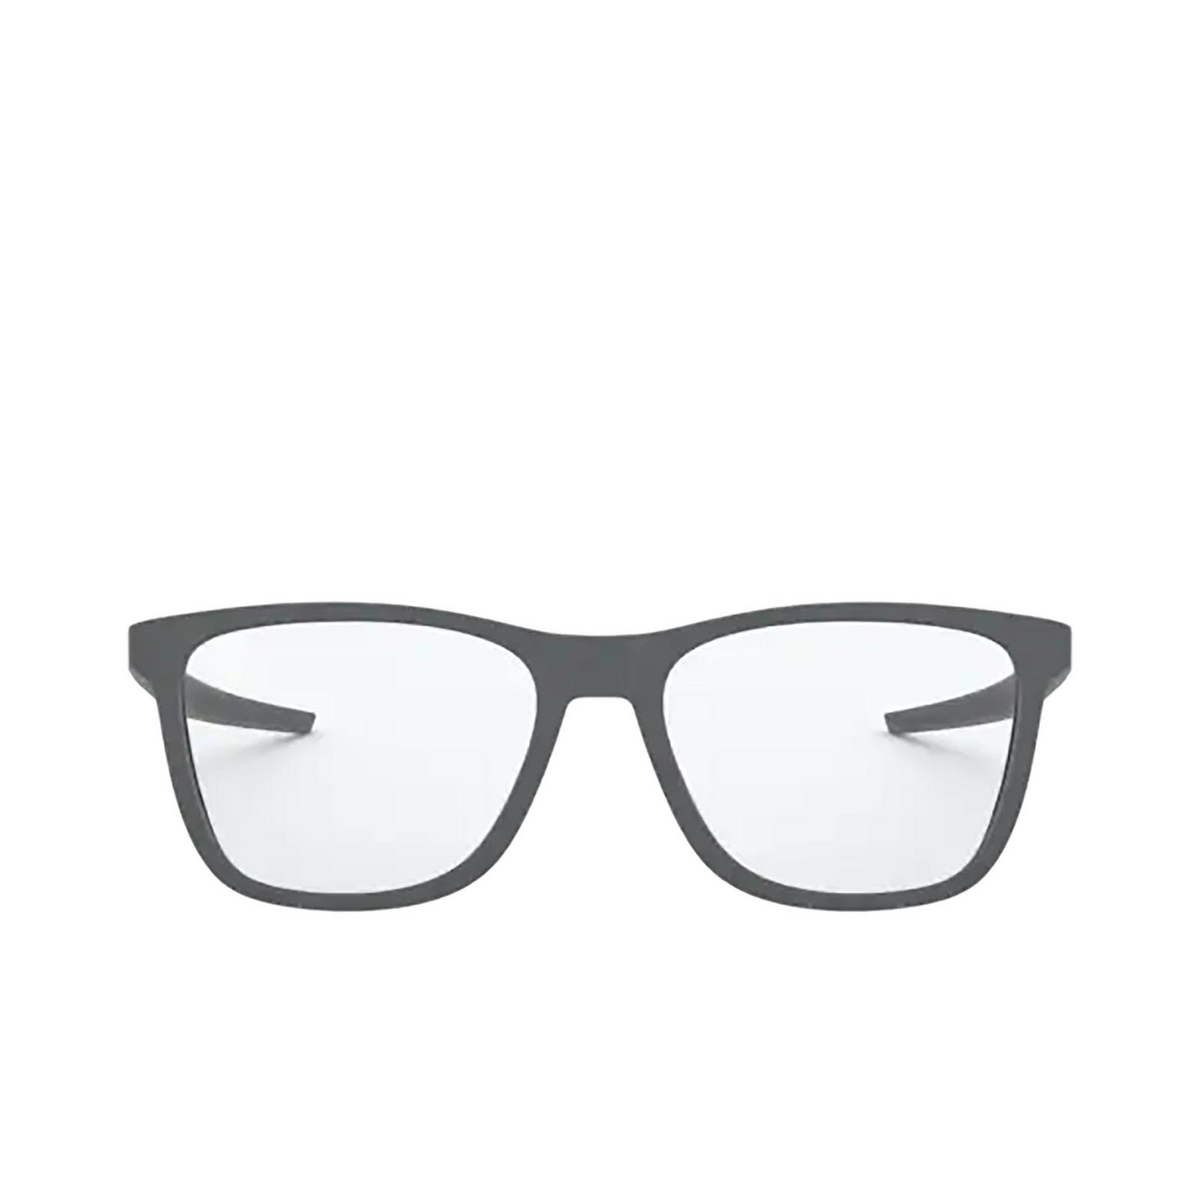 Oakley® Rectangle Eyeglasses: Centerboard OX8163 color Satin Light Steel 816304 - front view.